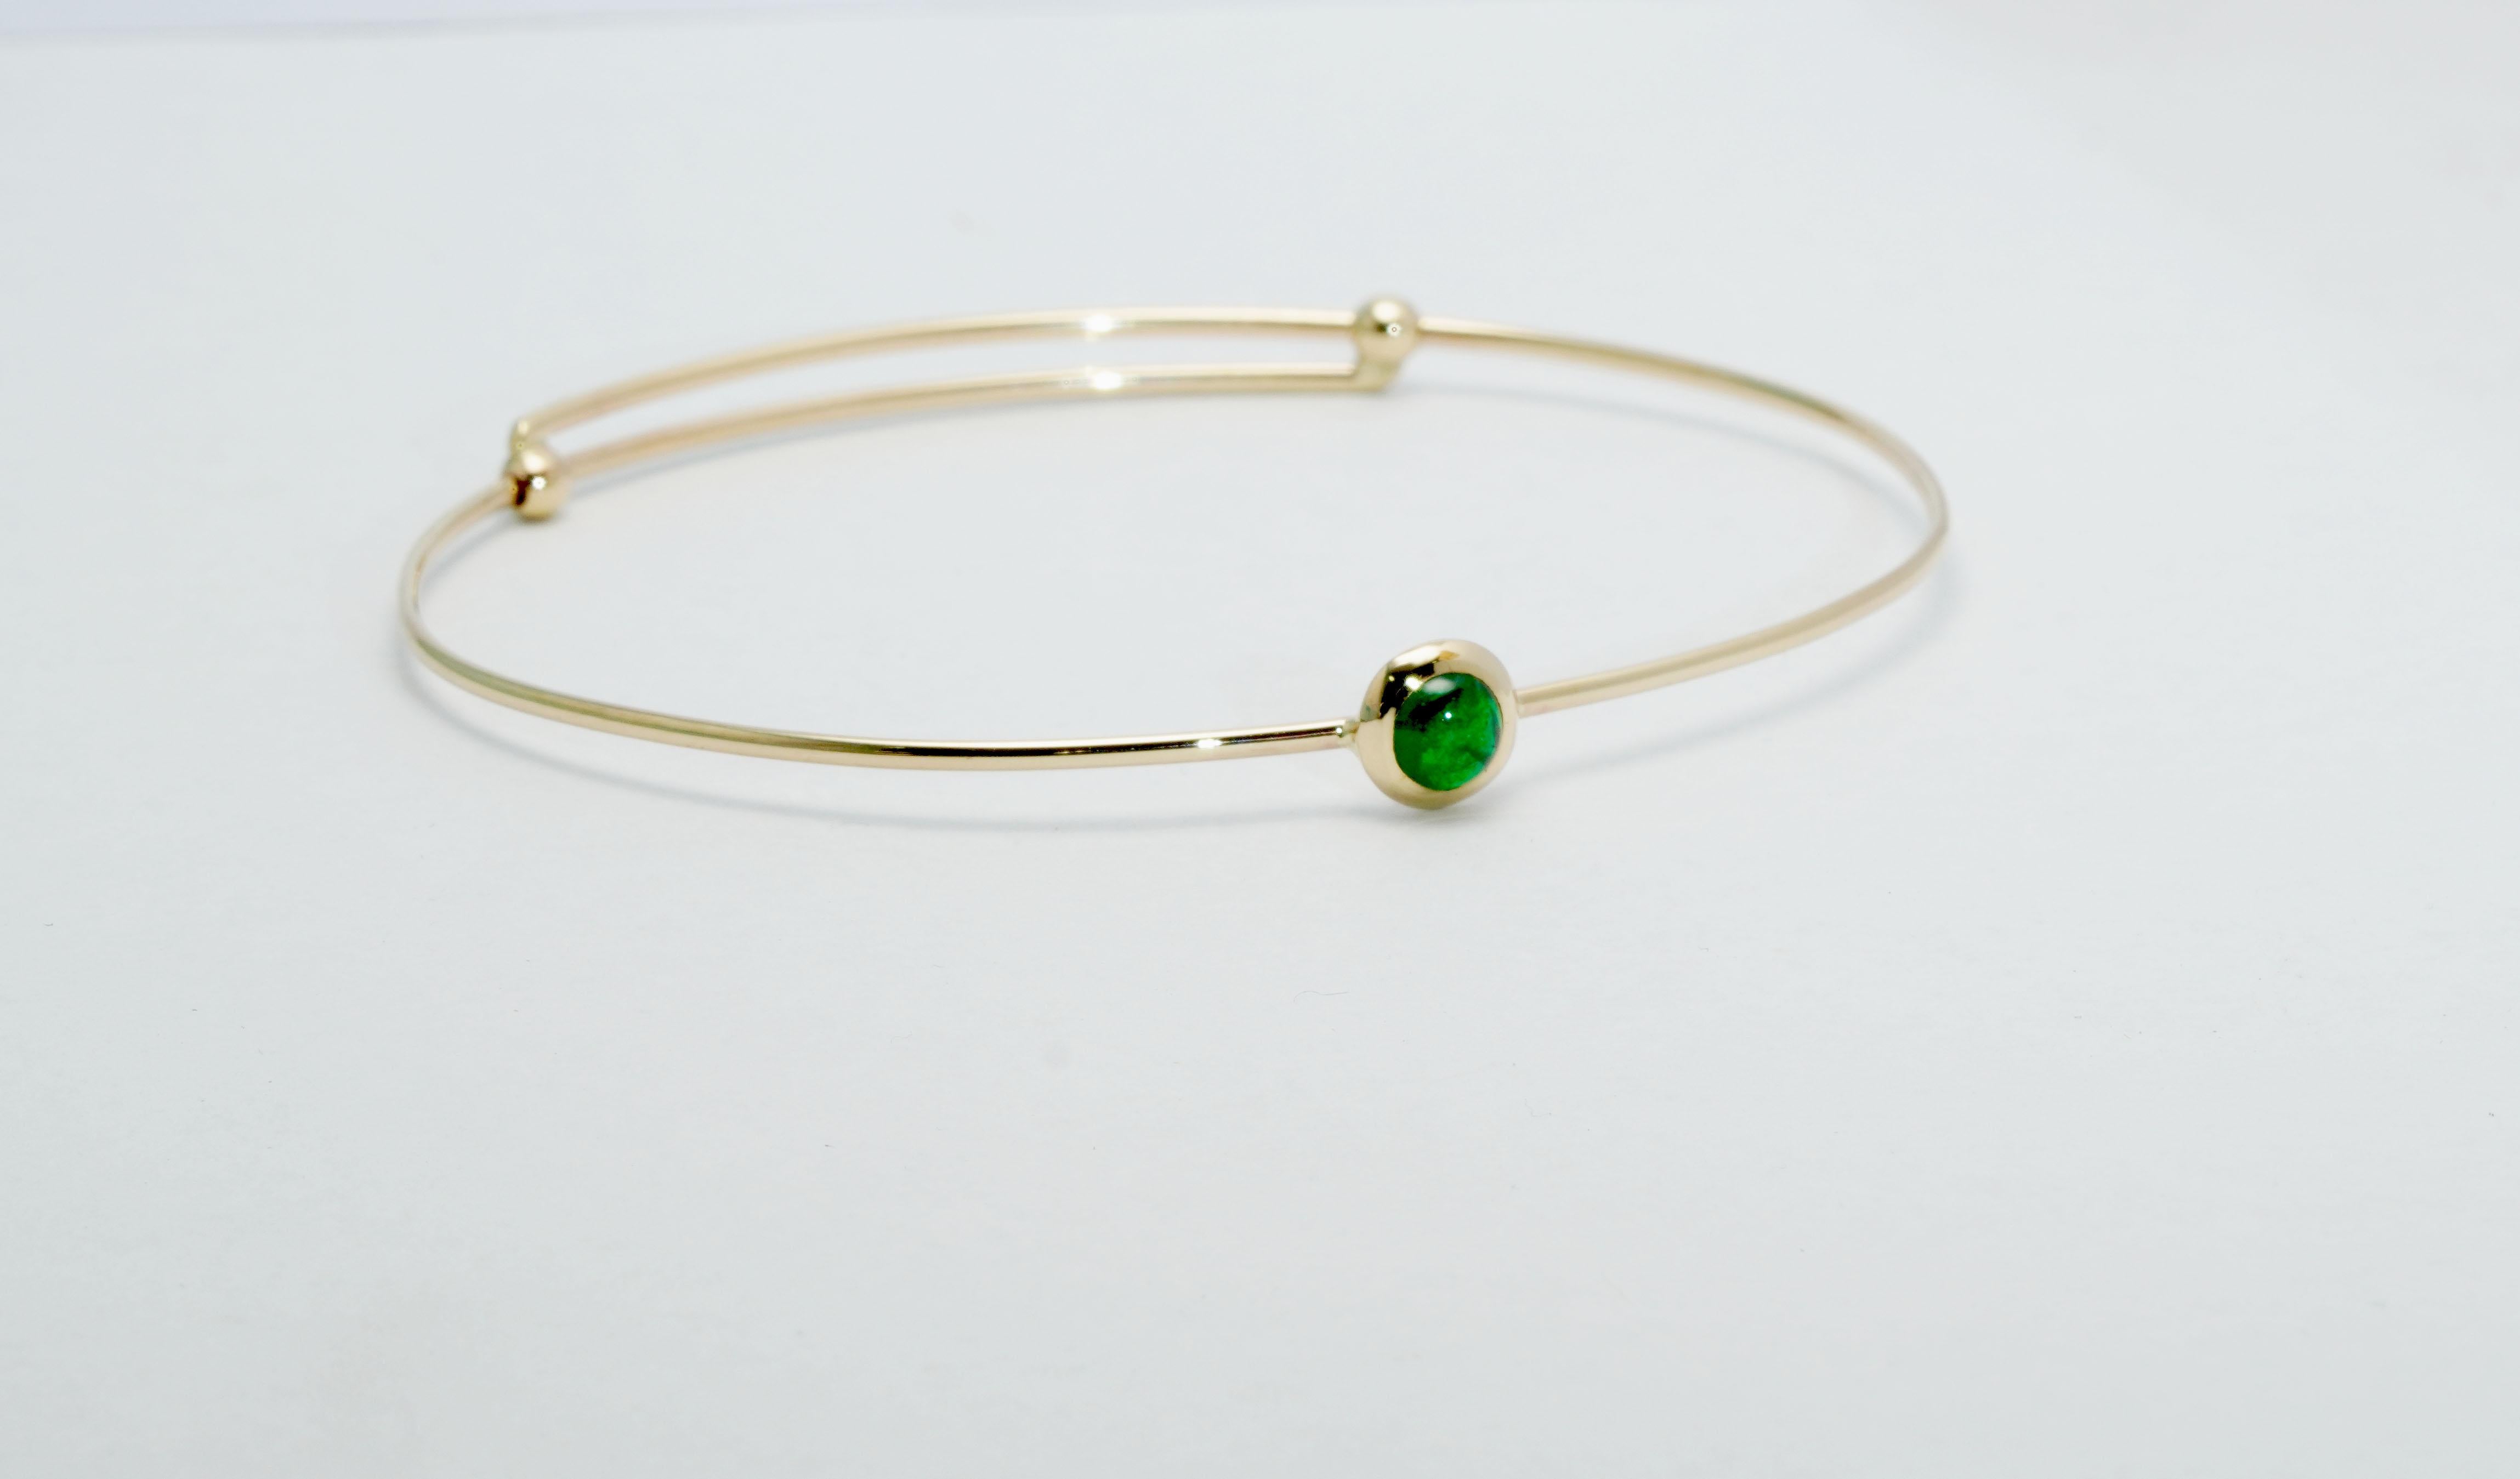 A stunning 14 ct. Yellow Gold Bracelet set with Green Tsavorite. The Bracelet is stretchable when put on.
Gold color: Yellow
Dimensions: 60mm. x 50mm. 
Total weight: 3.26 grams 

Set with:
- Green Tsavorite
Cut: Cabochon
Weight:  0.60 Carat
Color: